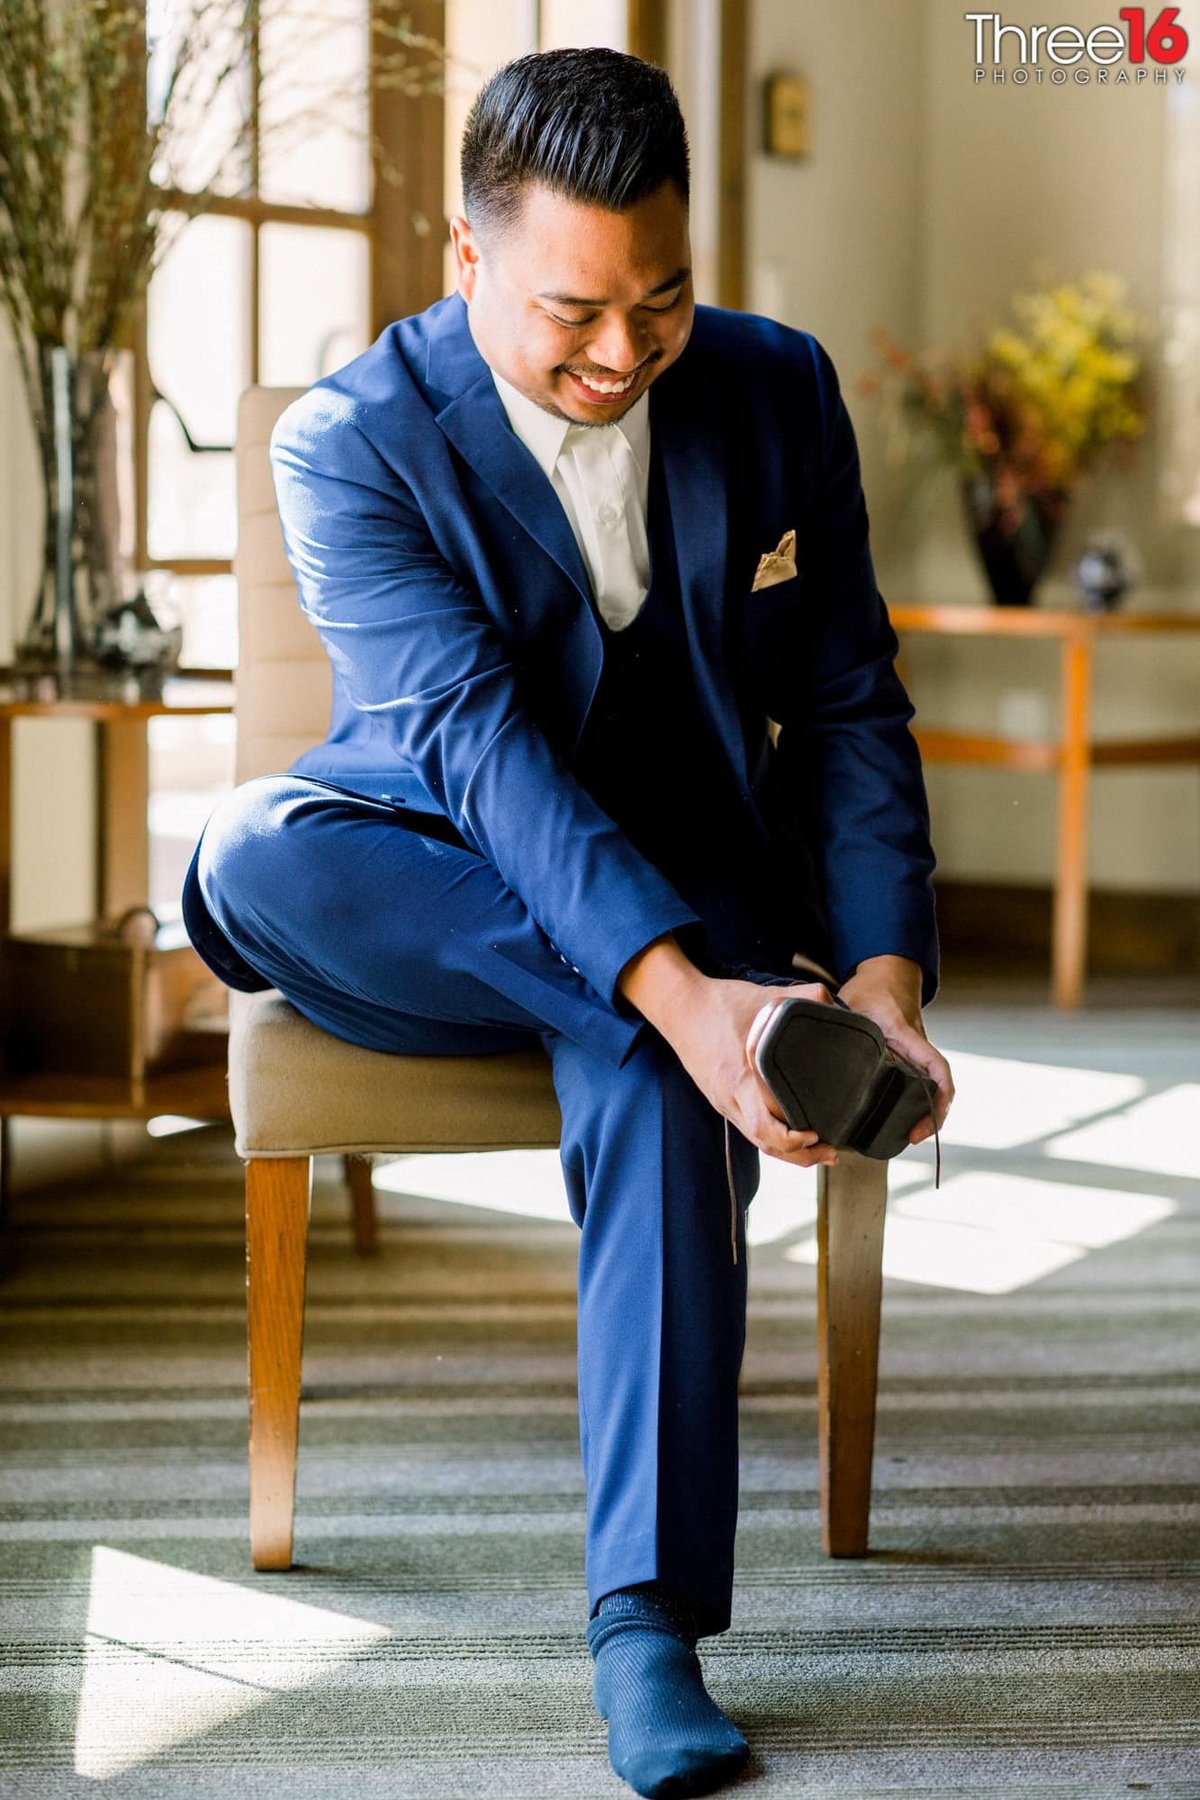 Groom putting on his shoes before the ceremony starts